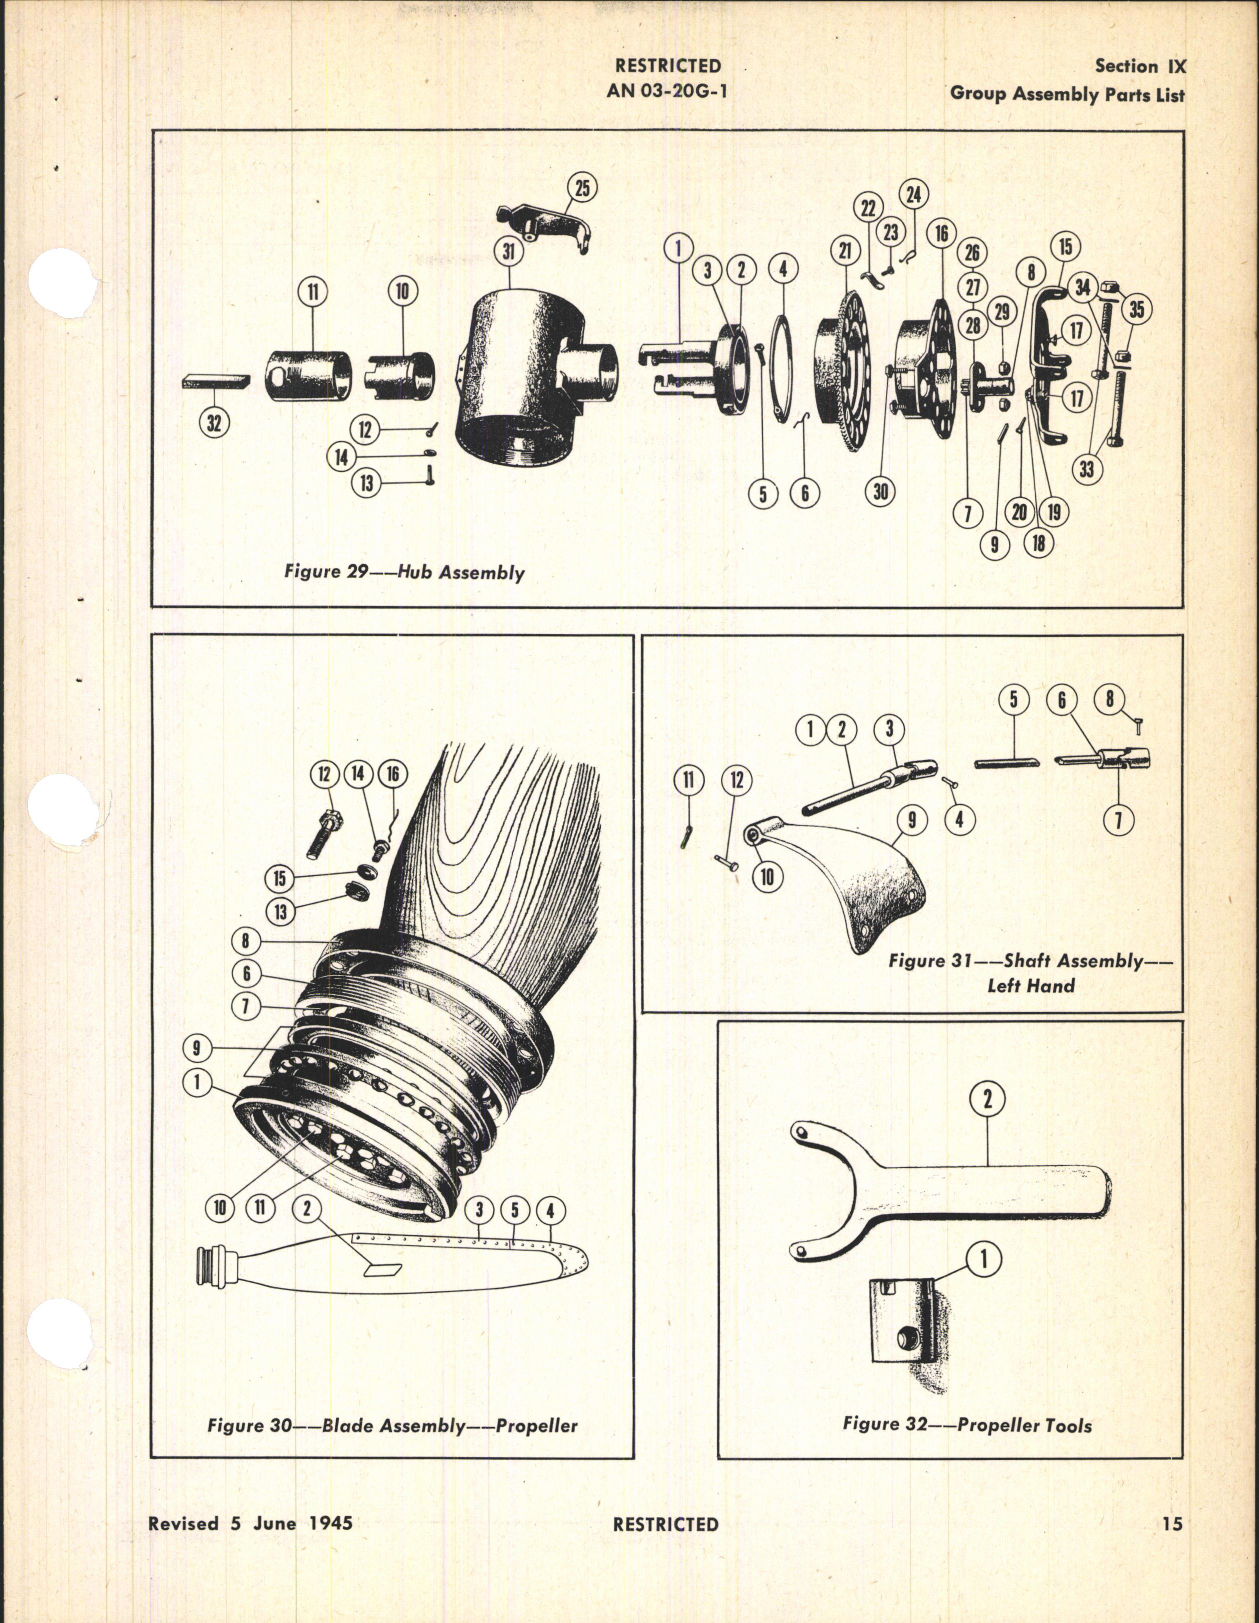 Sample page 7 from AirCorps Library document: Handbook of Instructions with Parts Catalog for Manual Controlled Propeller Model R002